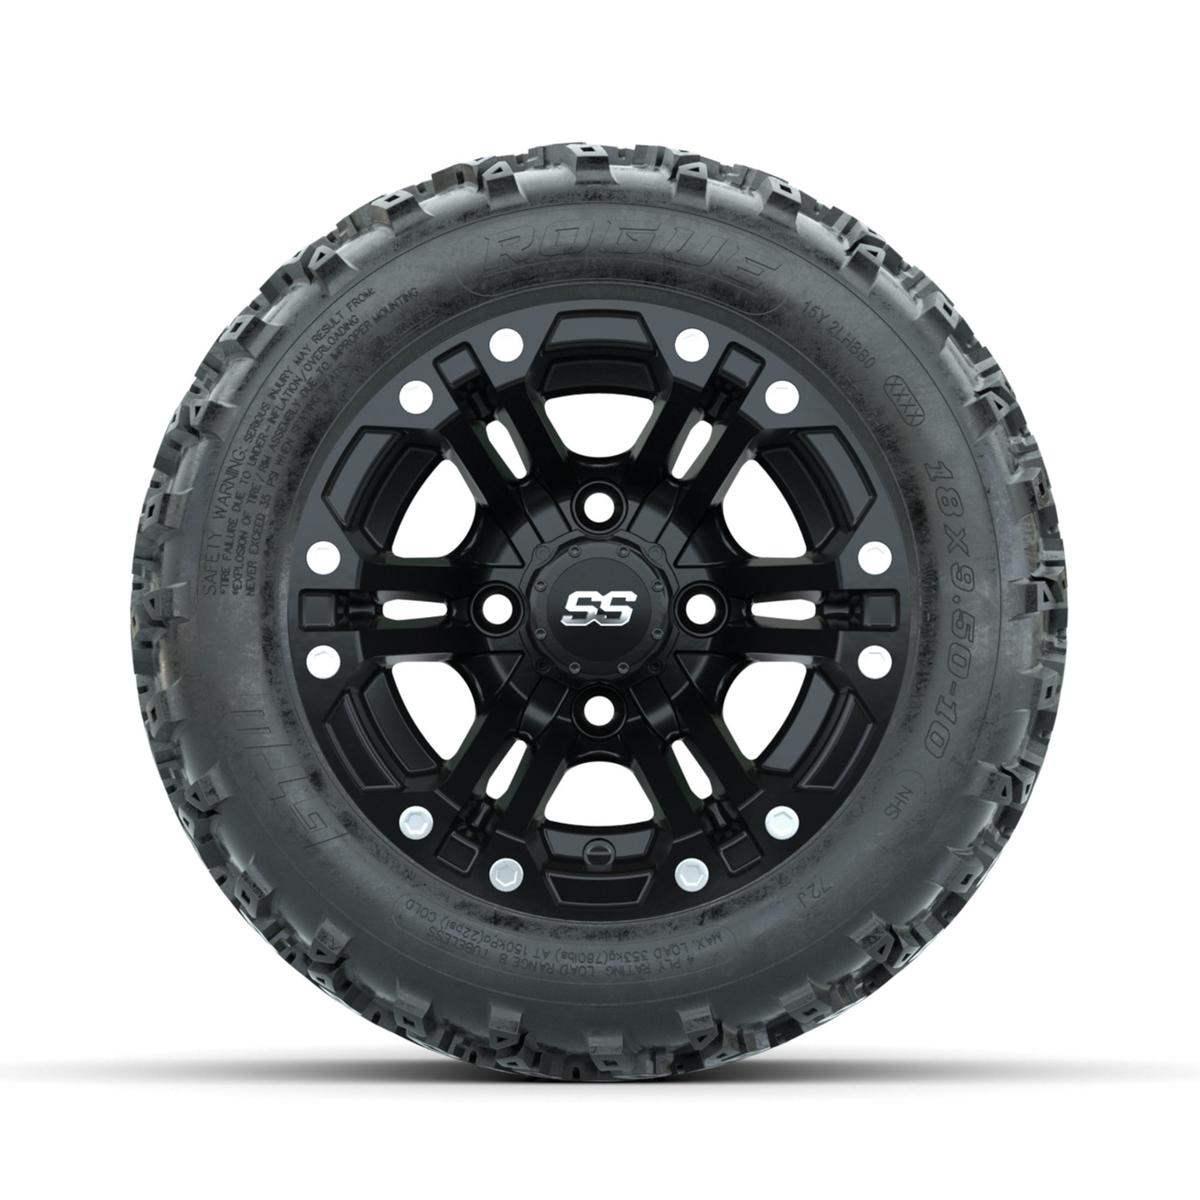 GTW Specter Matte Black 10 in Wheels with 18x9.50-10 Rogue All Terrain Tires – Full Set